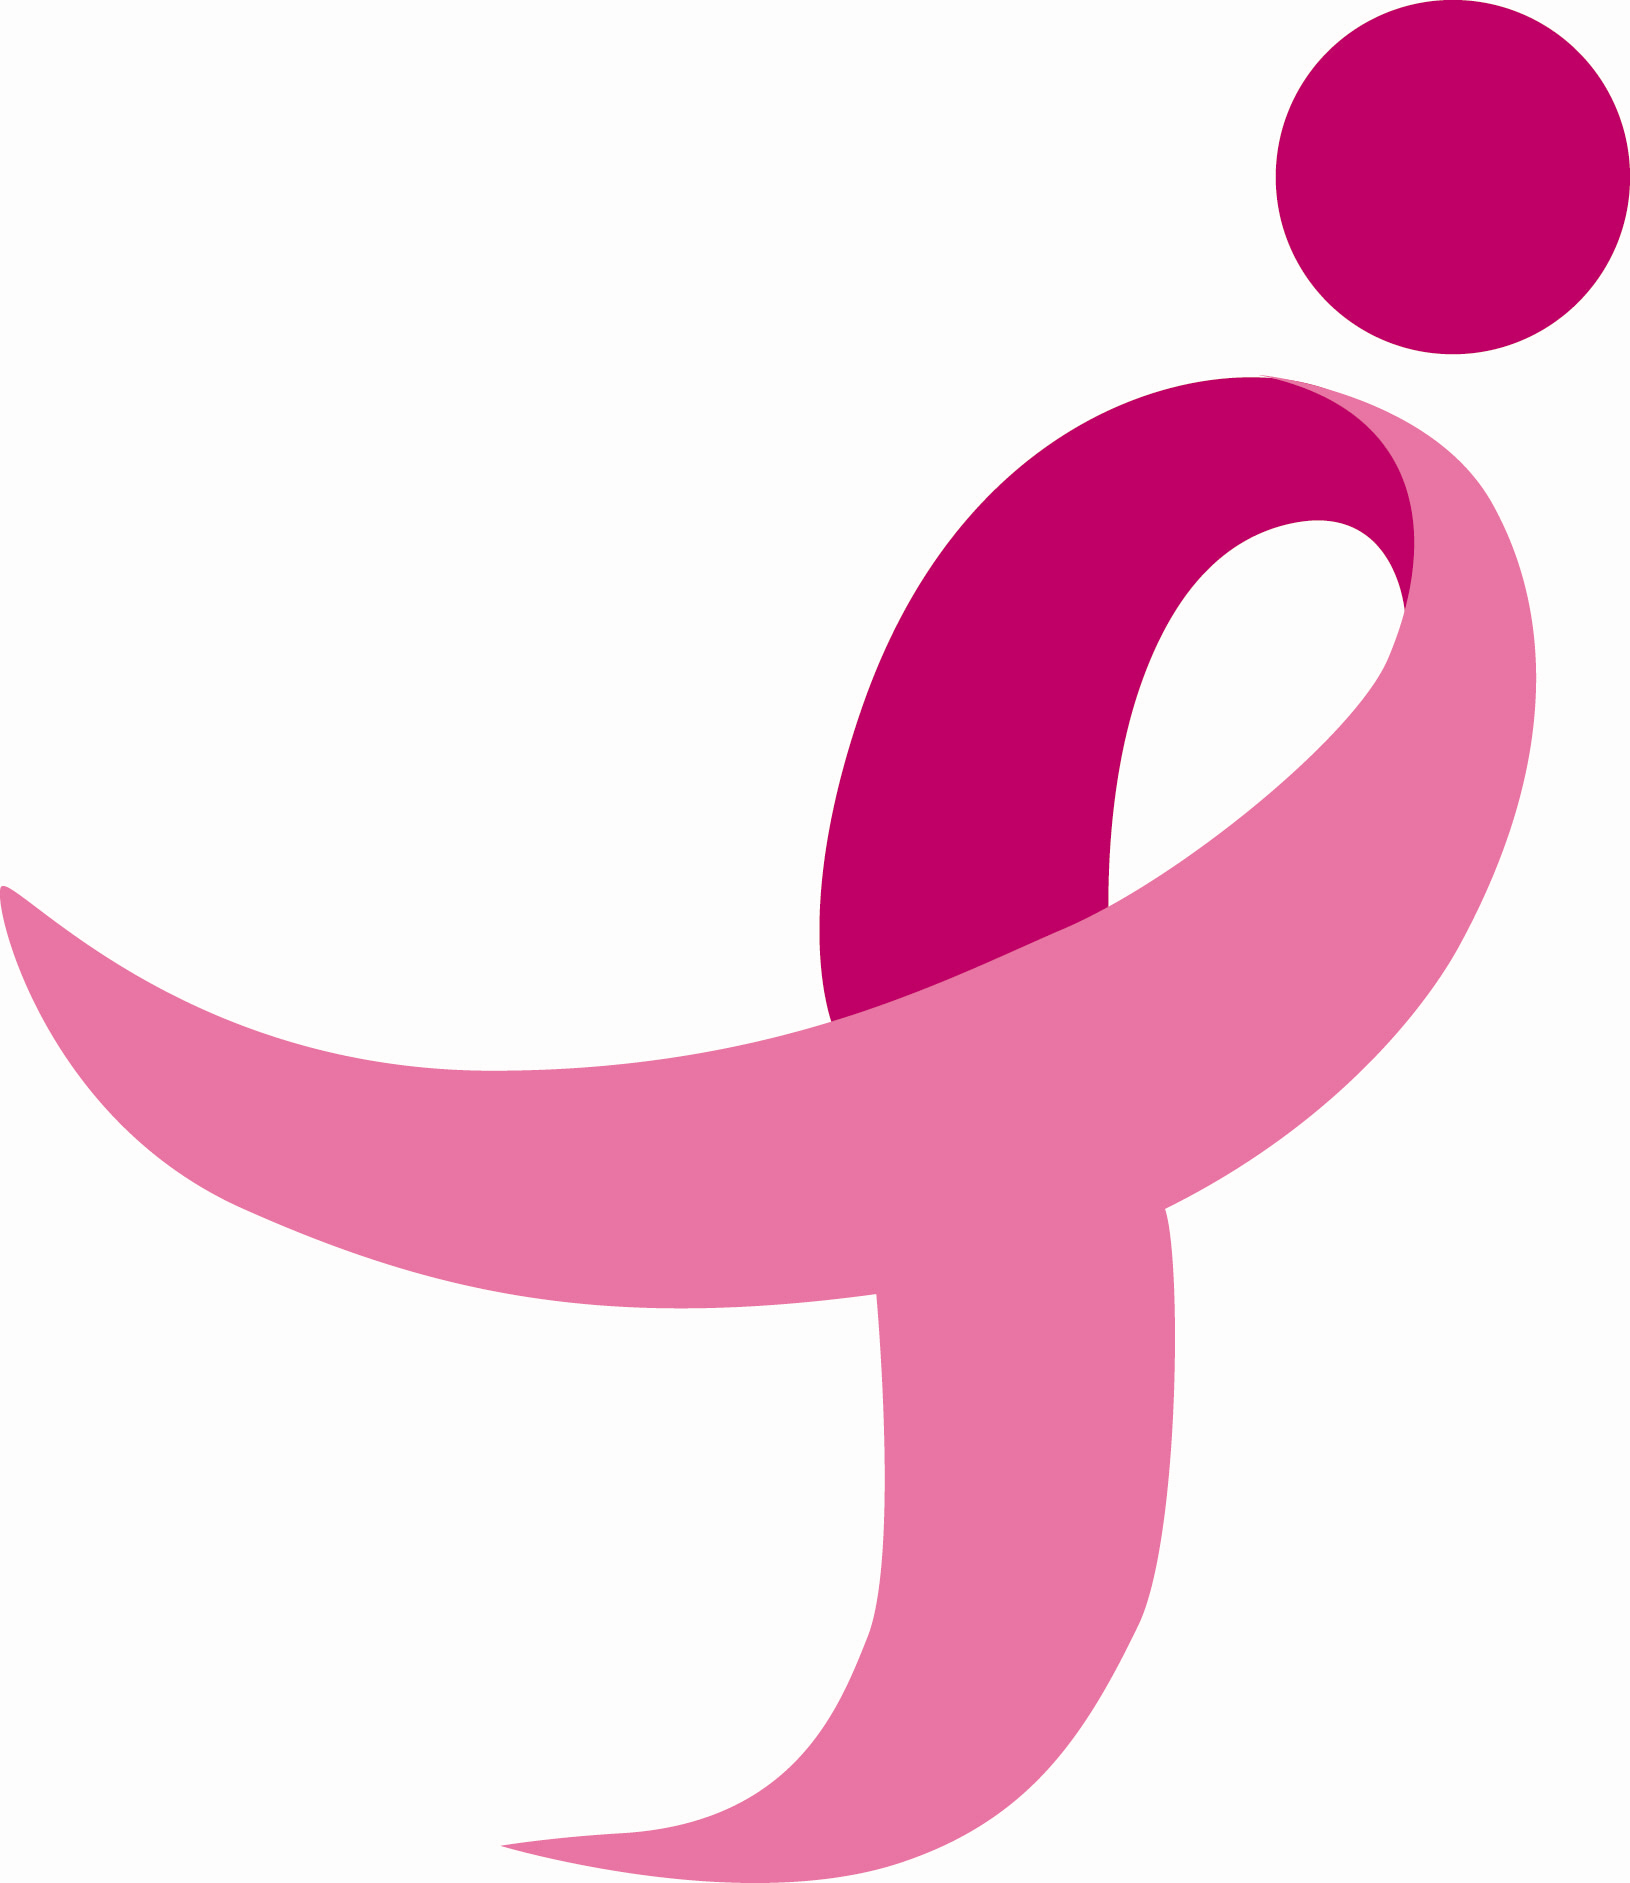 Breast Cancer Ribbon Vector Art Free - Cliparts.co